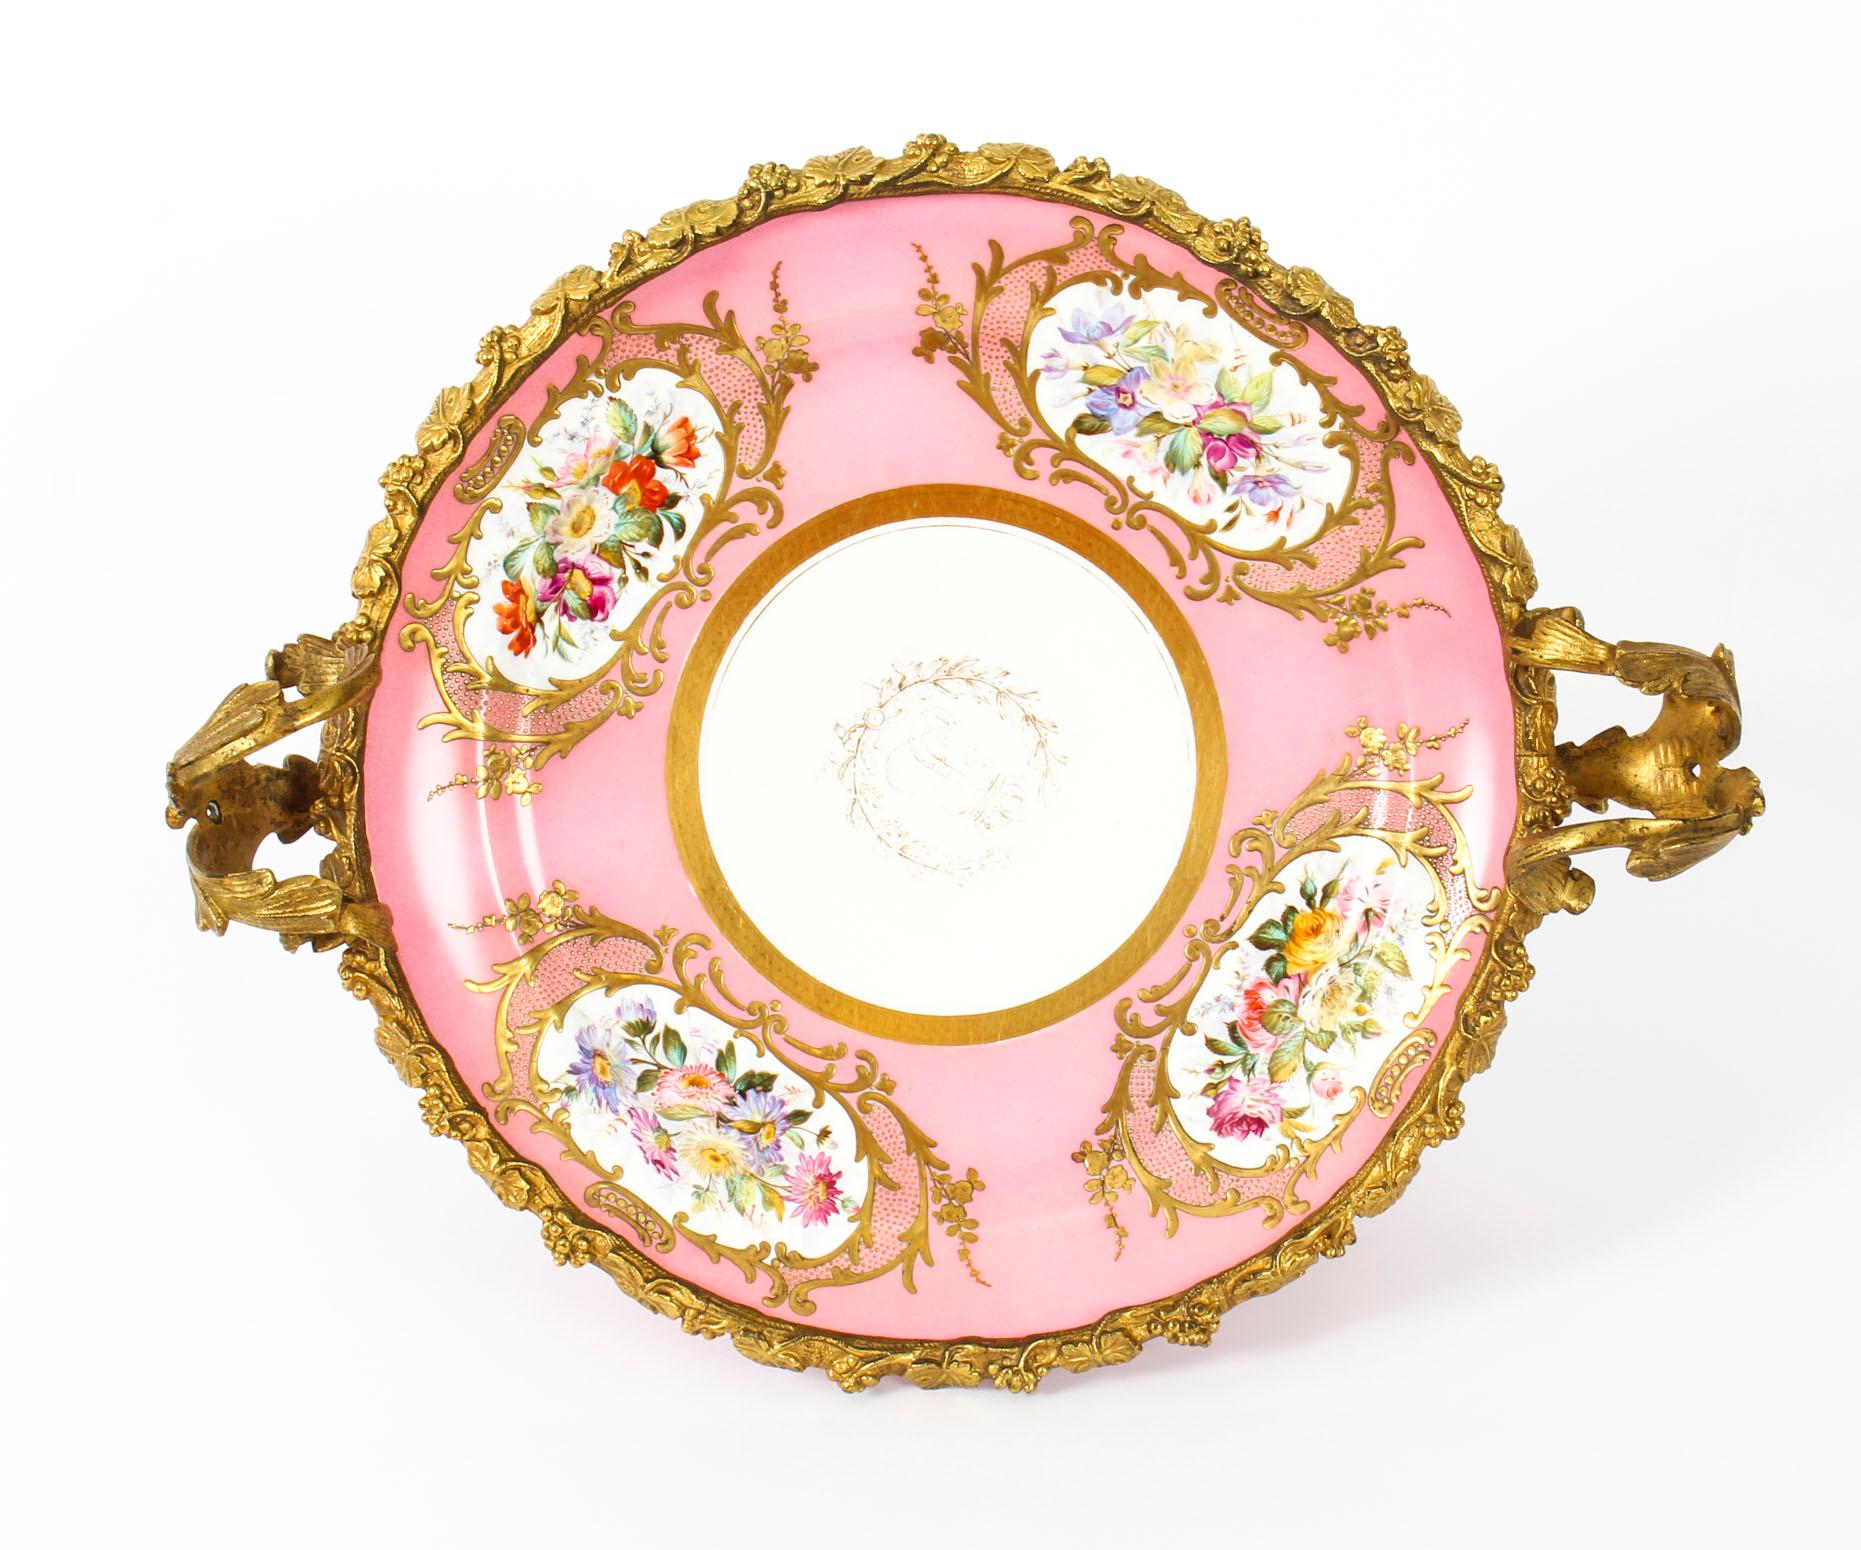 This is a stunning antique ormolu-mounted Sevres Chateau De Bizy porcelain centrepiece, with printed marks for 1843.
 
This striking centrepiece is round in shape with two elegant scrolling foliate ormolu handles and an exquisite ormolu border in